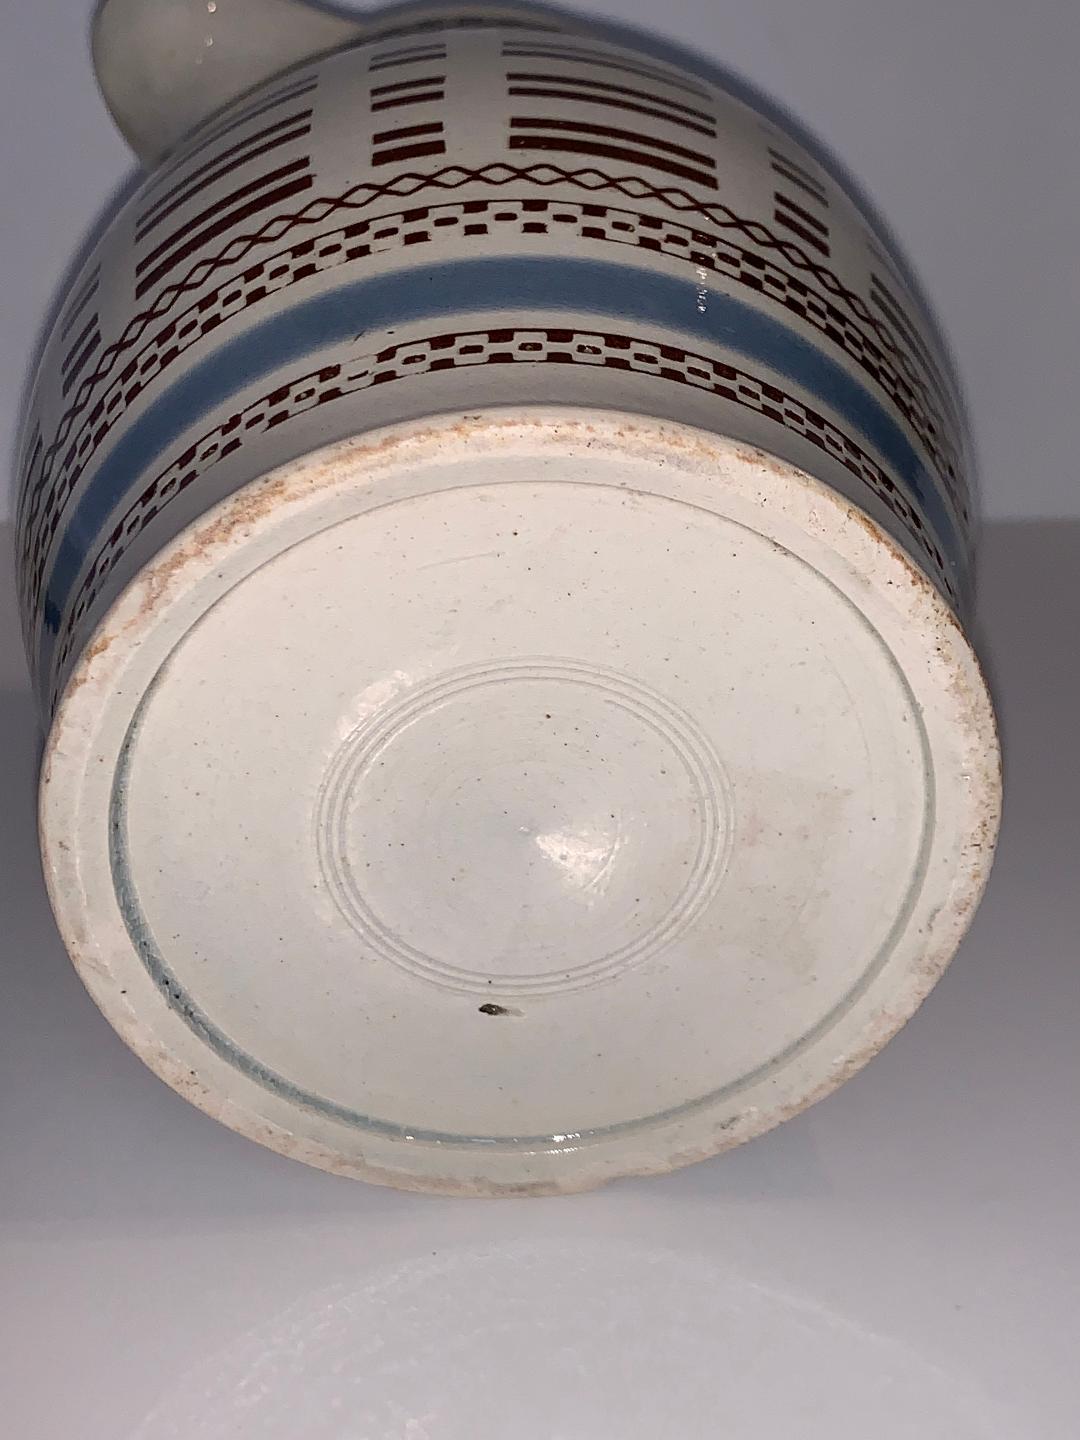 Earthenware Mochaware Pitcher with Baby Blue and Black Slip Decoration, England, circa 1815